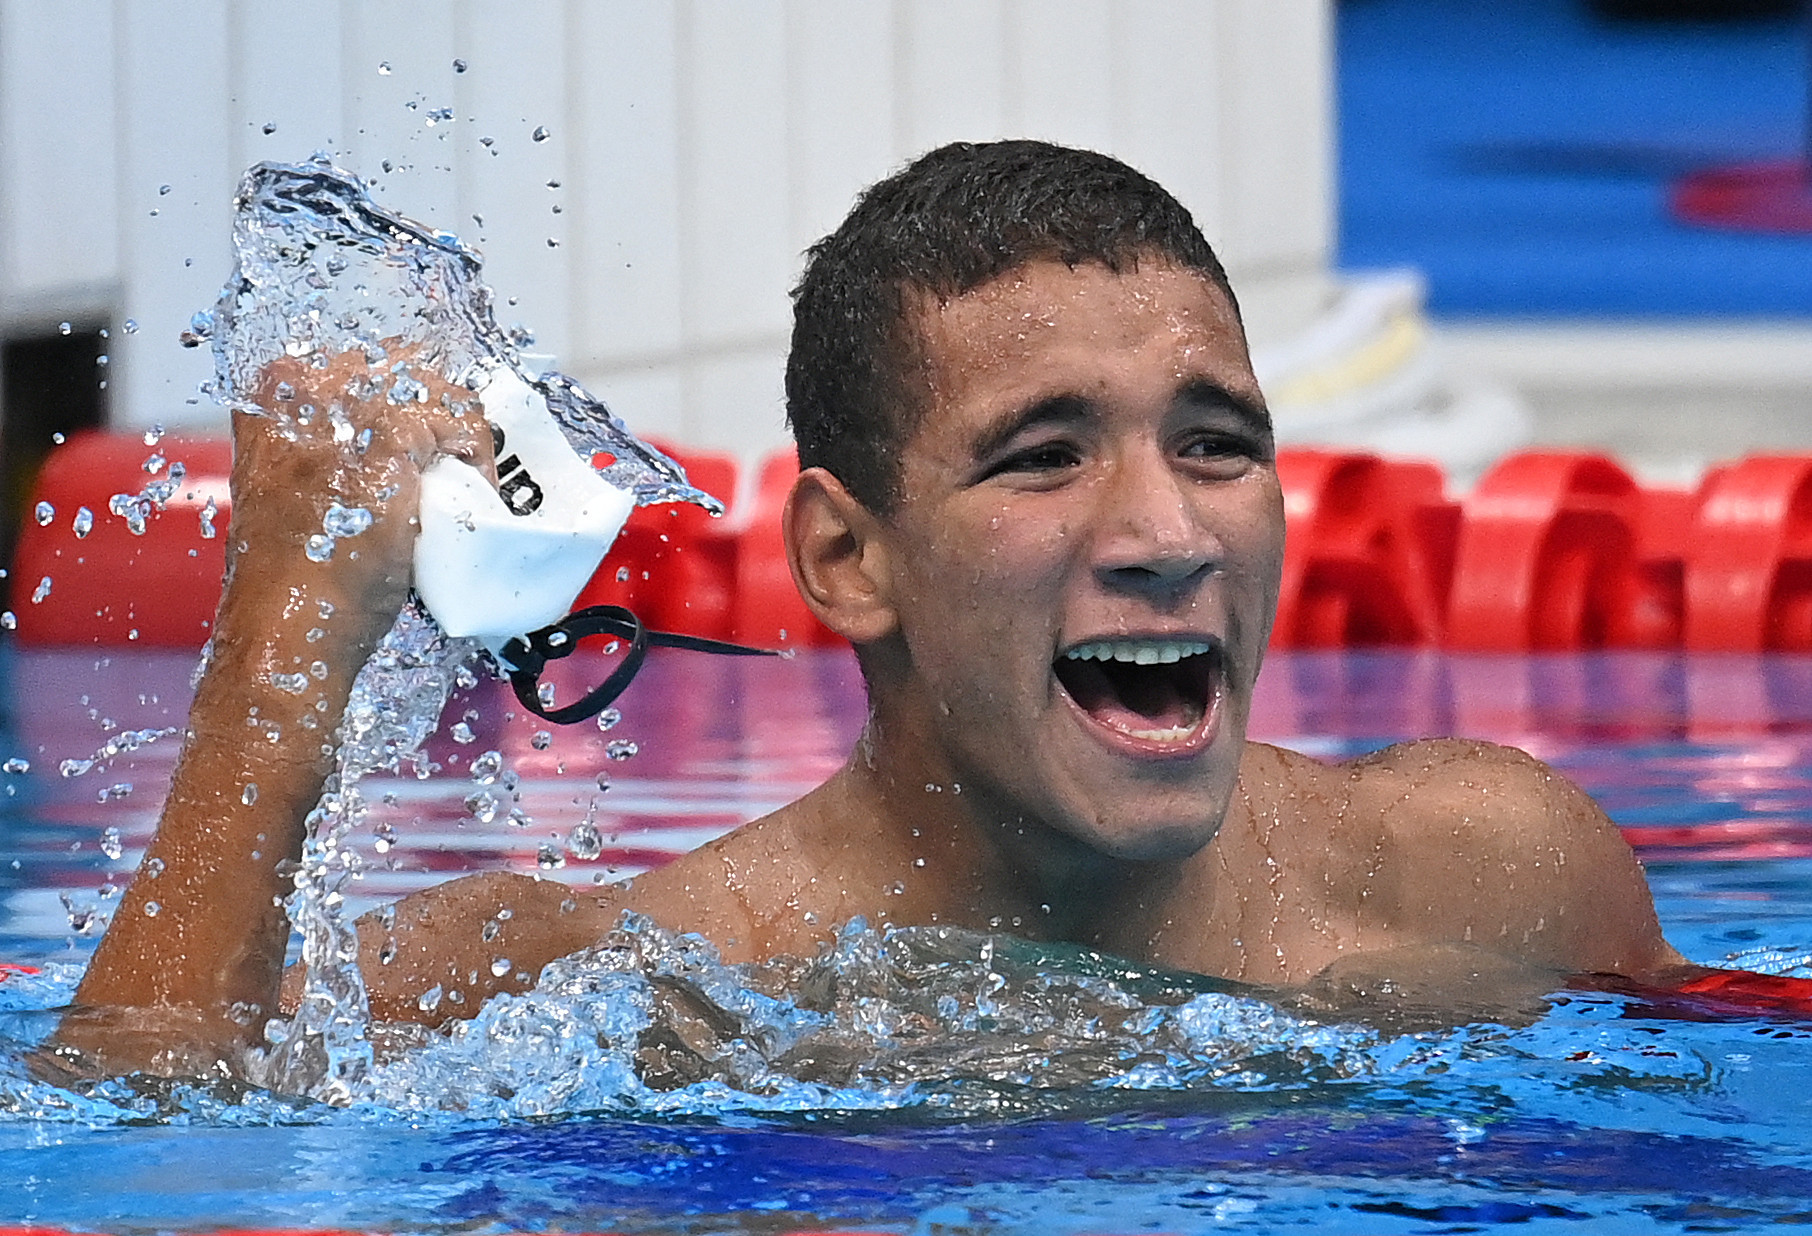 Tunisian teenager Ayoub Hafnaoui won the men's 400m freestyle in the standout result from the pool ©Getty Images